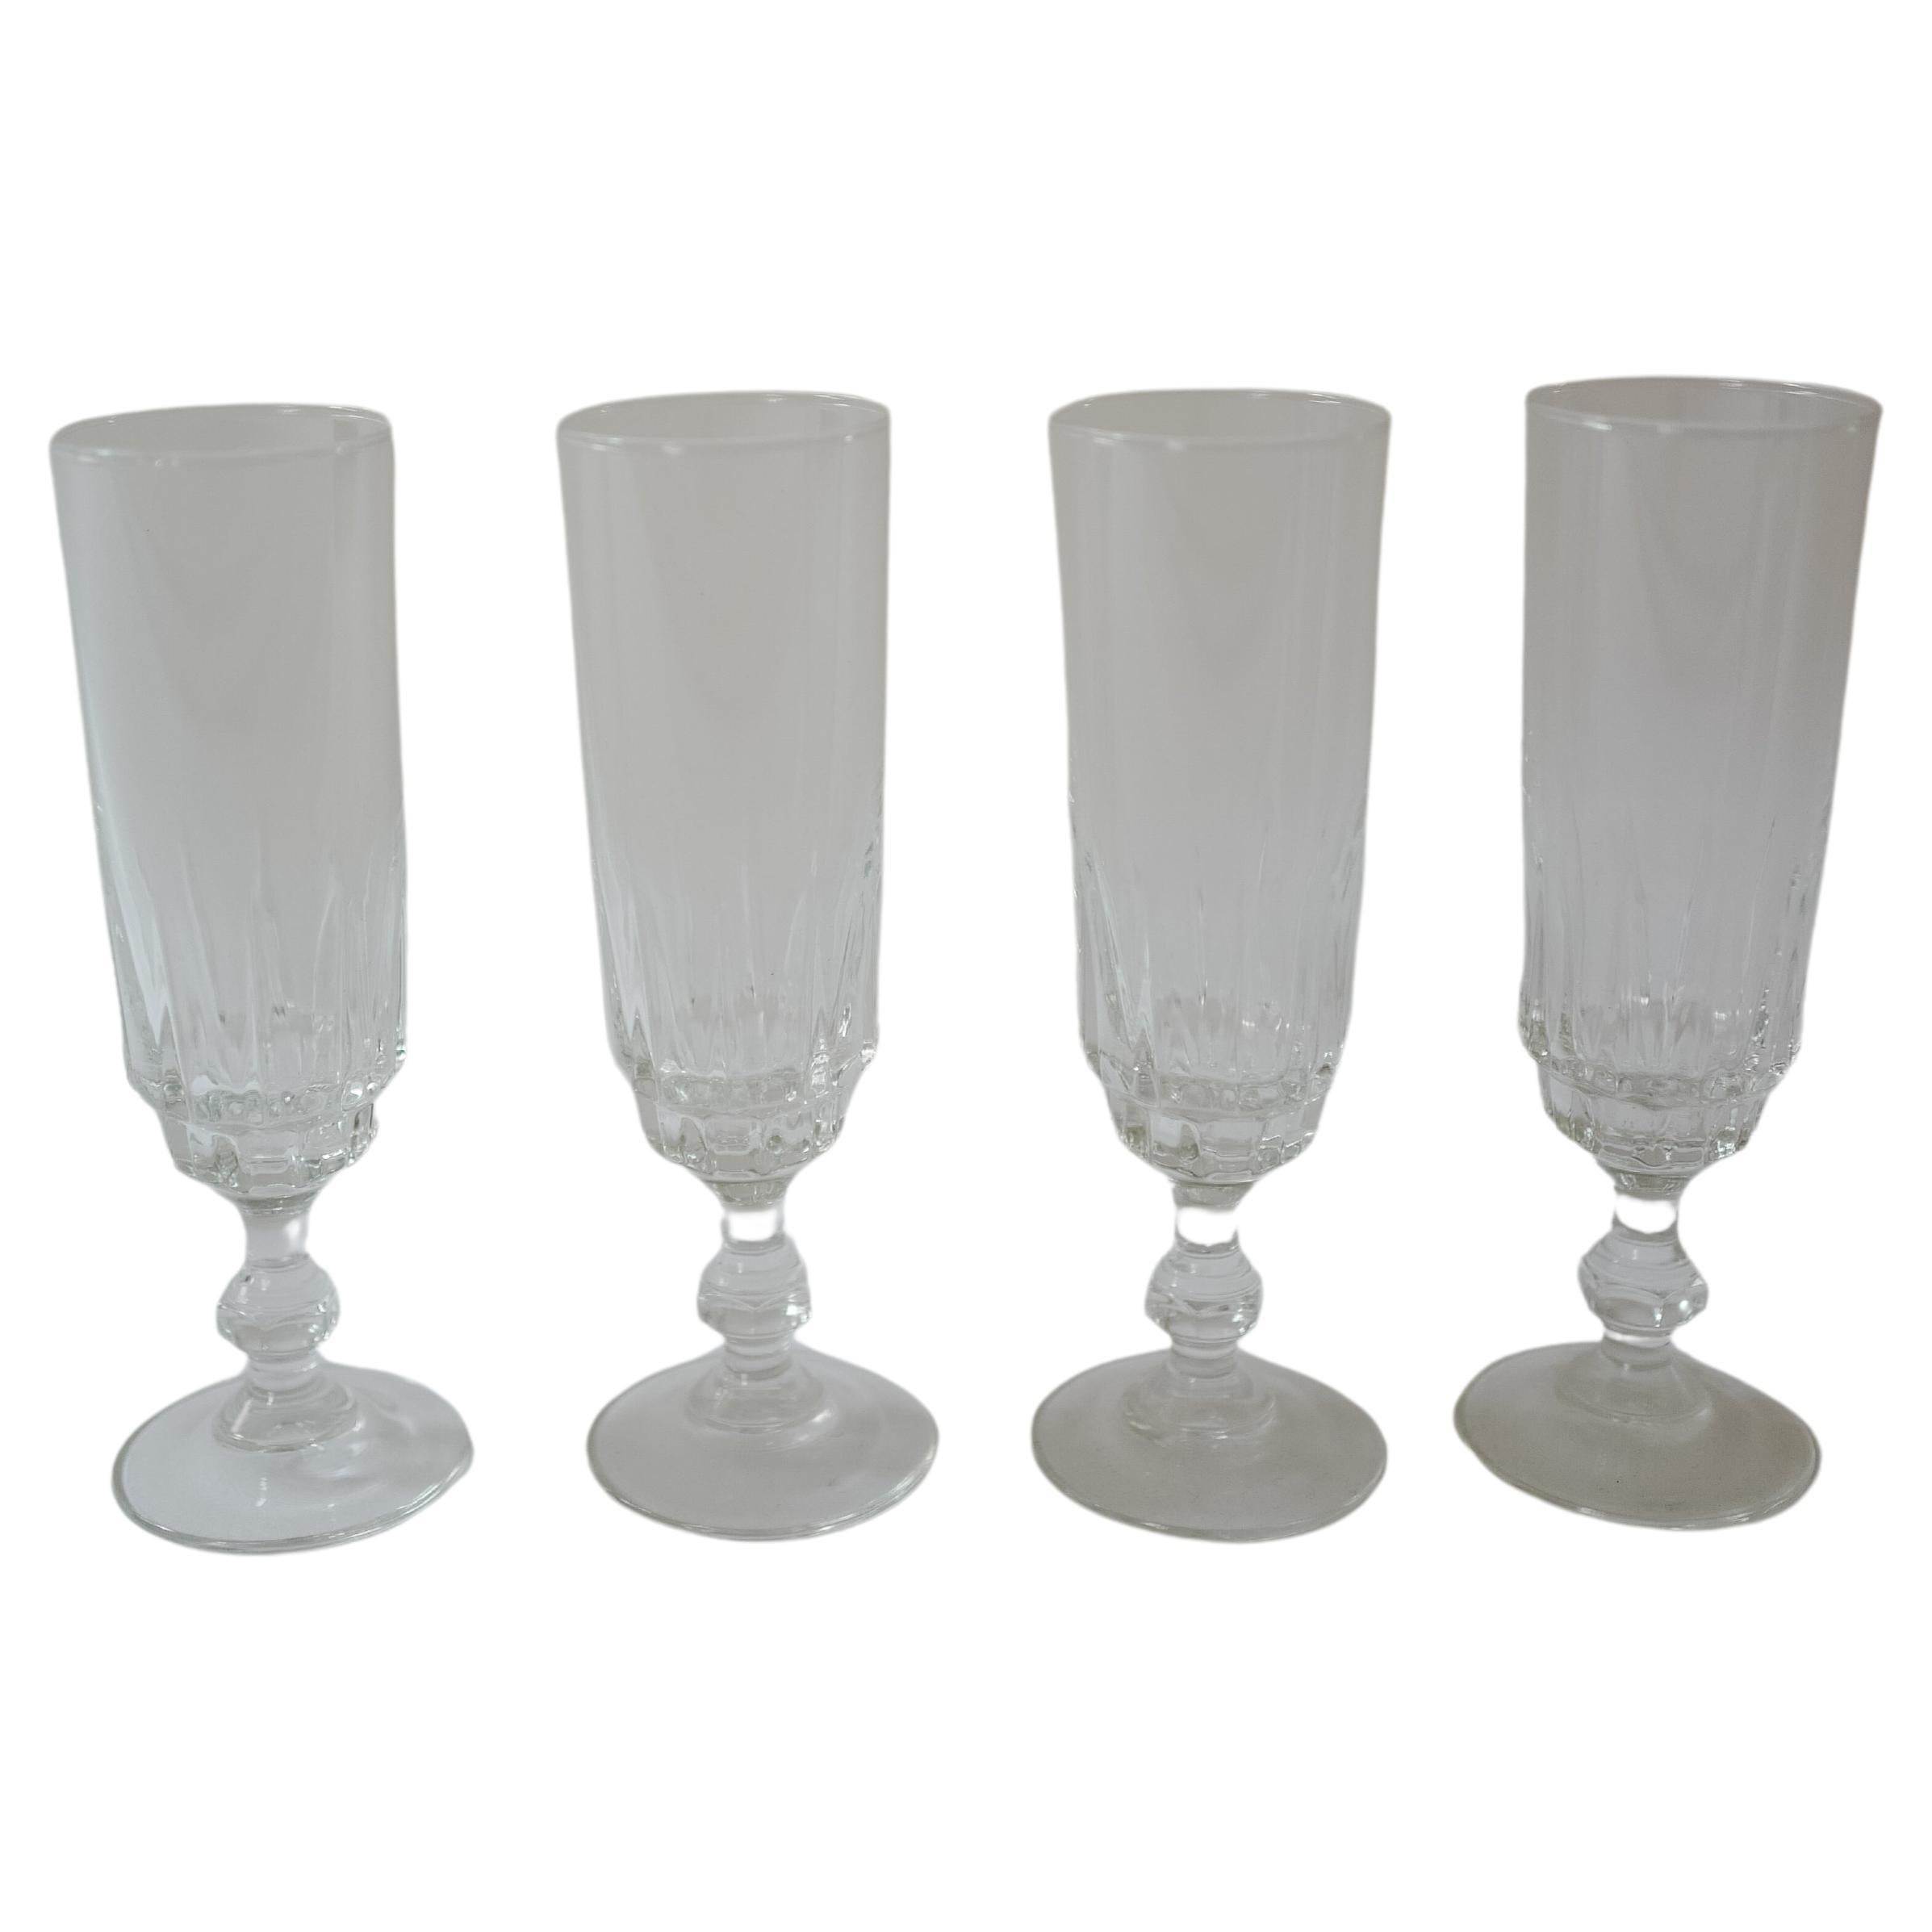 Four Vintage French Crystal Champagne Flutes